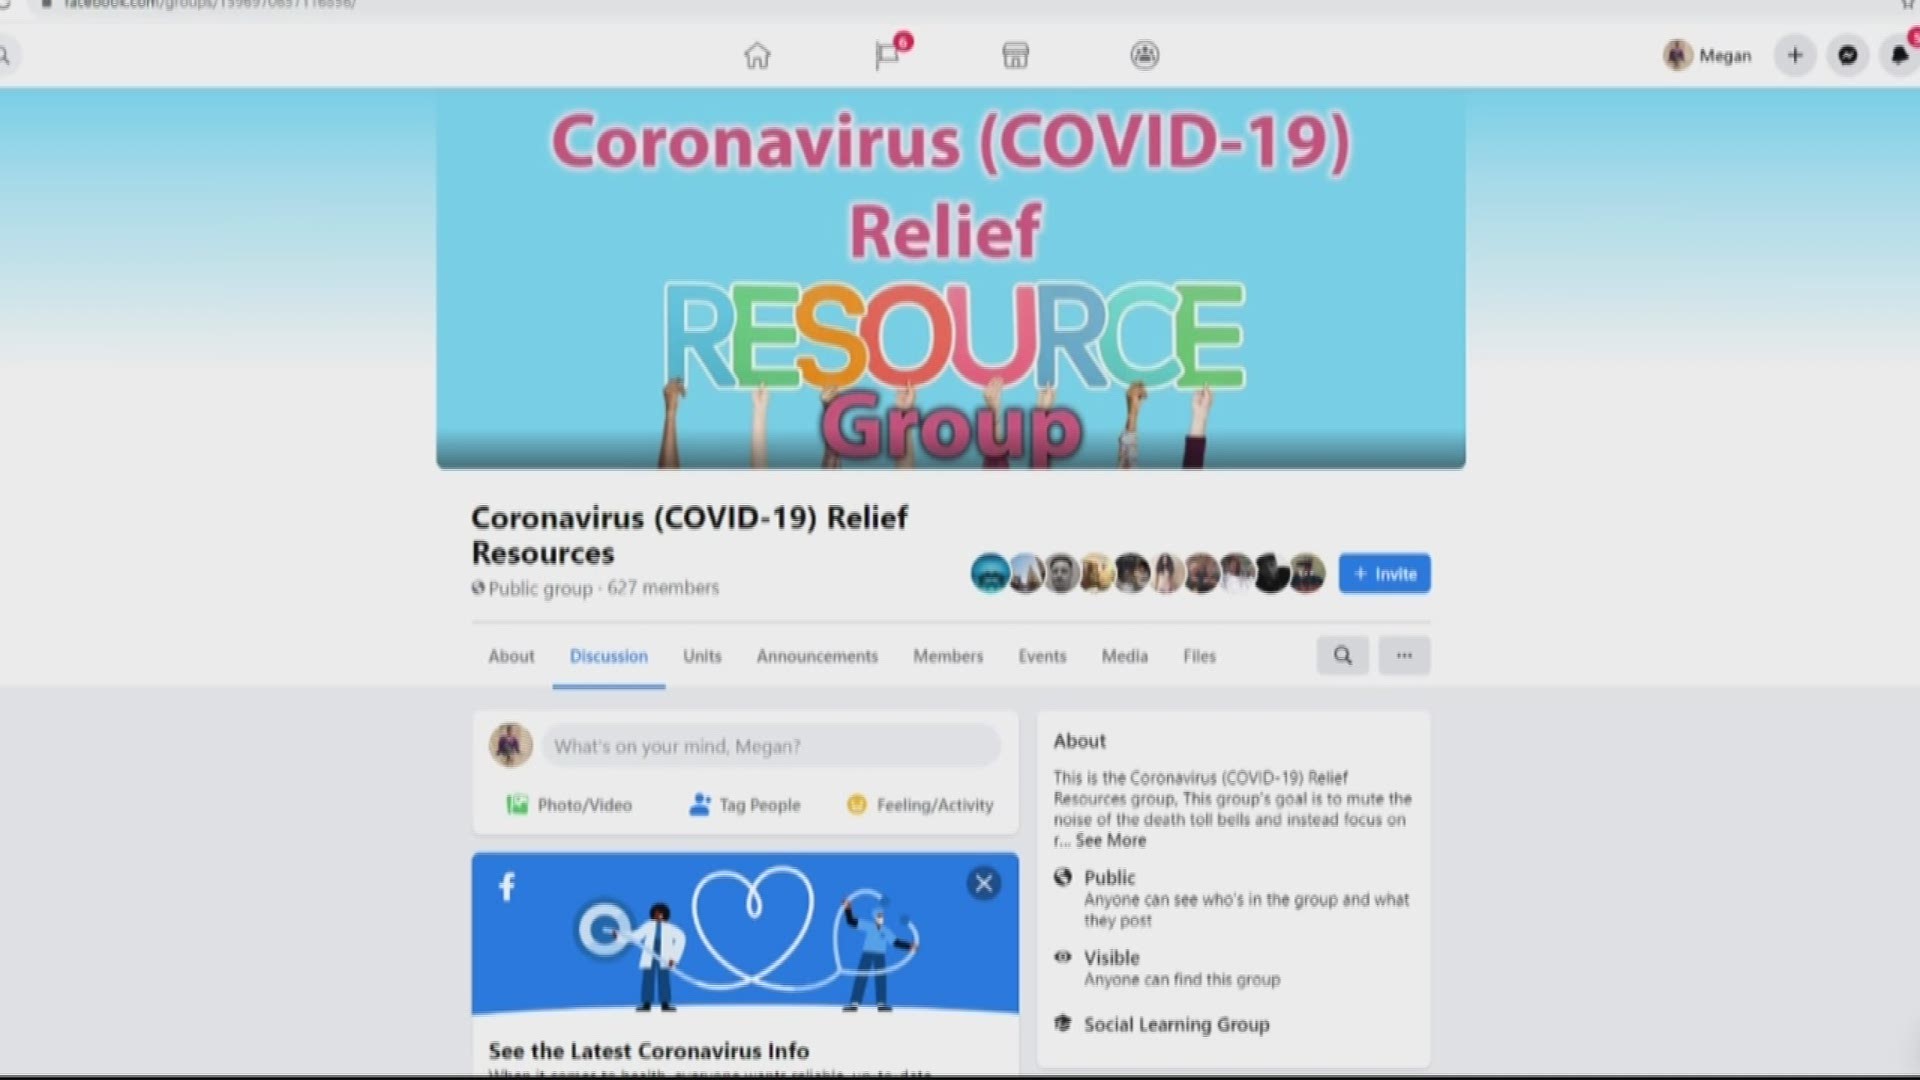 A Facebook group called "Coronavirus Relief Resources" wants to help people find resources during the coronavirus pandemic.